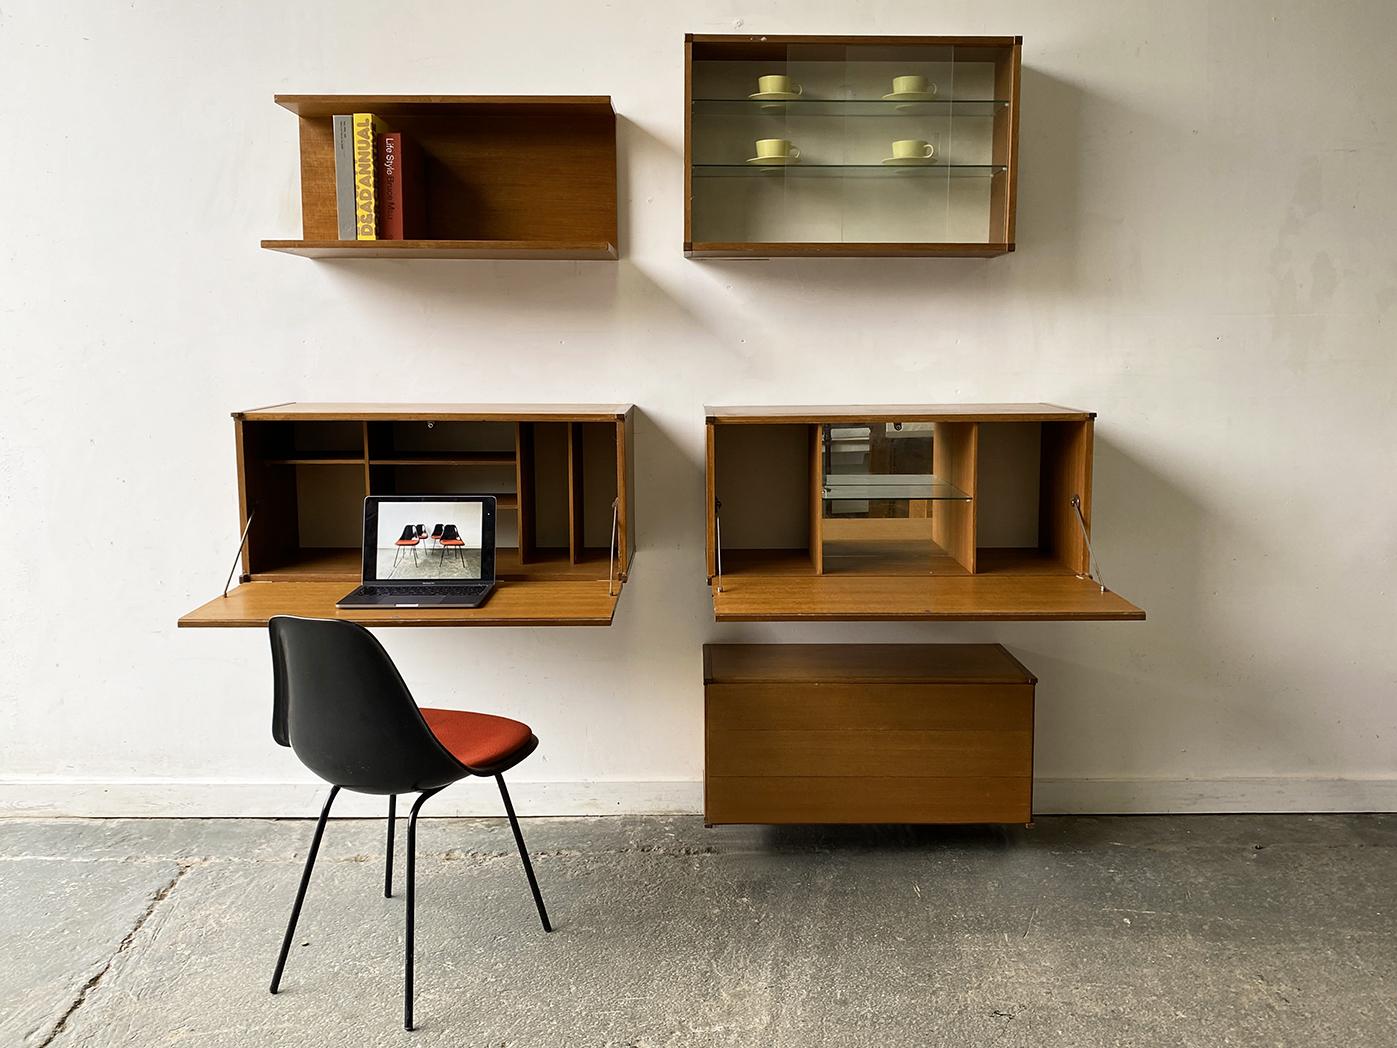 These units are available as a set of individually
Please ask for individual prices.

Beaver and Tapley created their modular system in the early 1960’s, and they are still trading today. Units shown here are shelf, display cabinet, desk, drinks